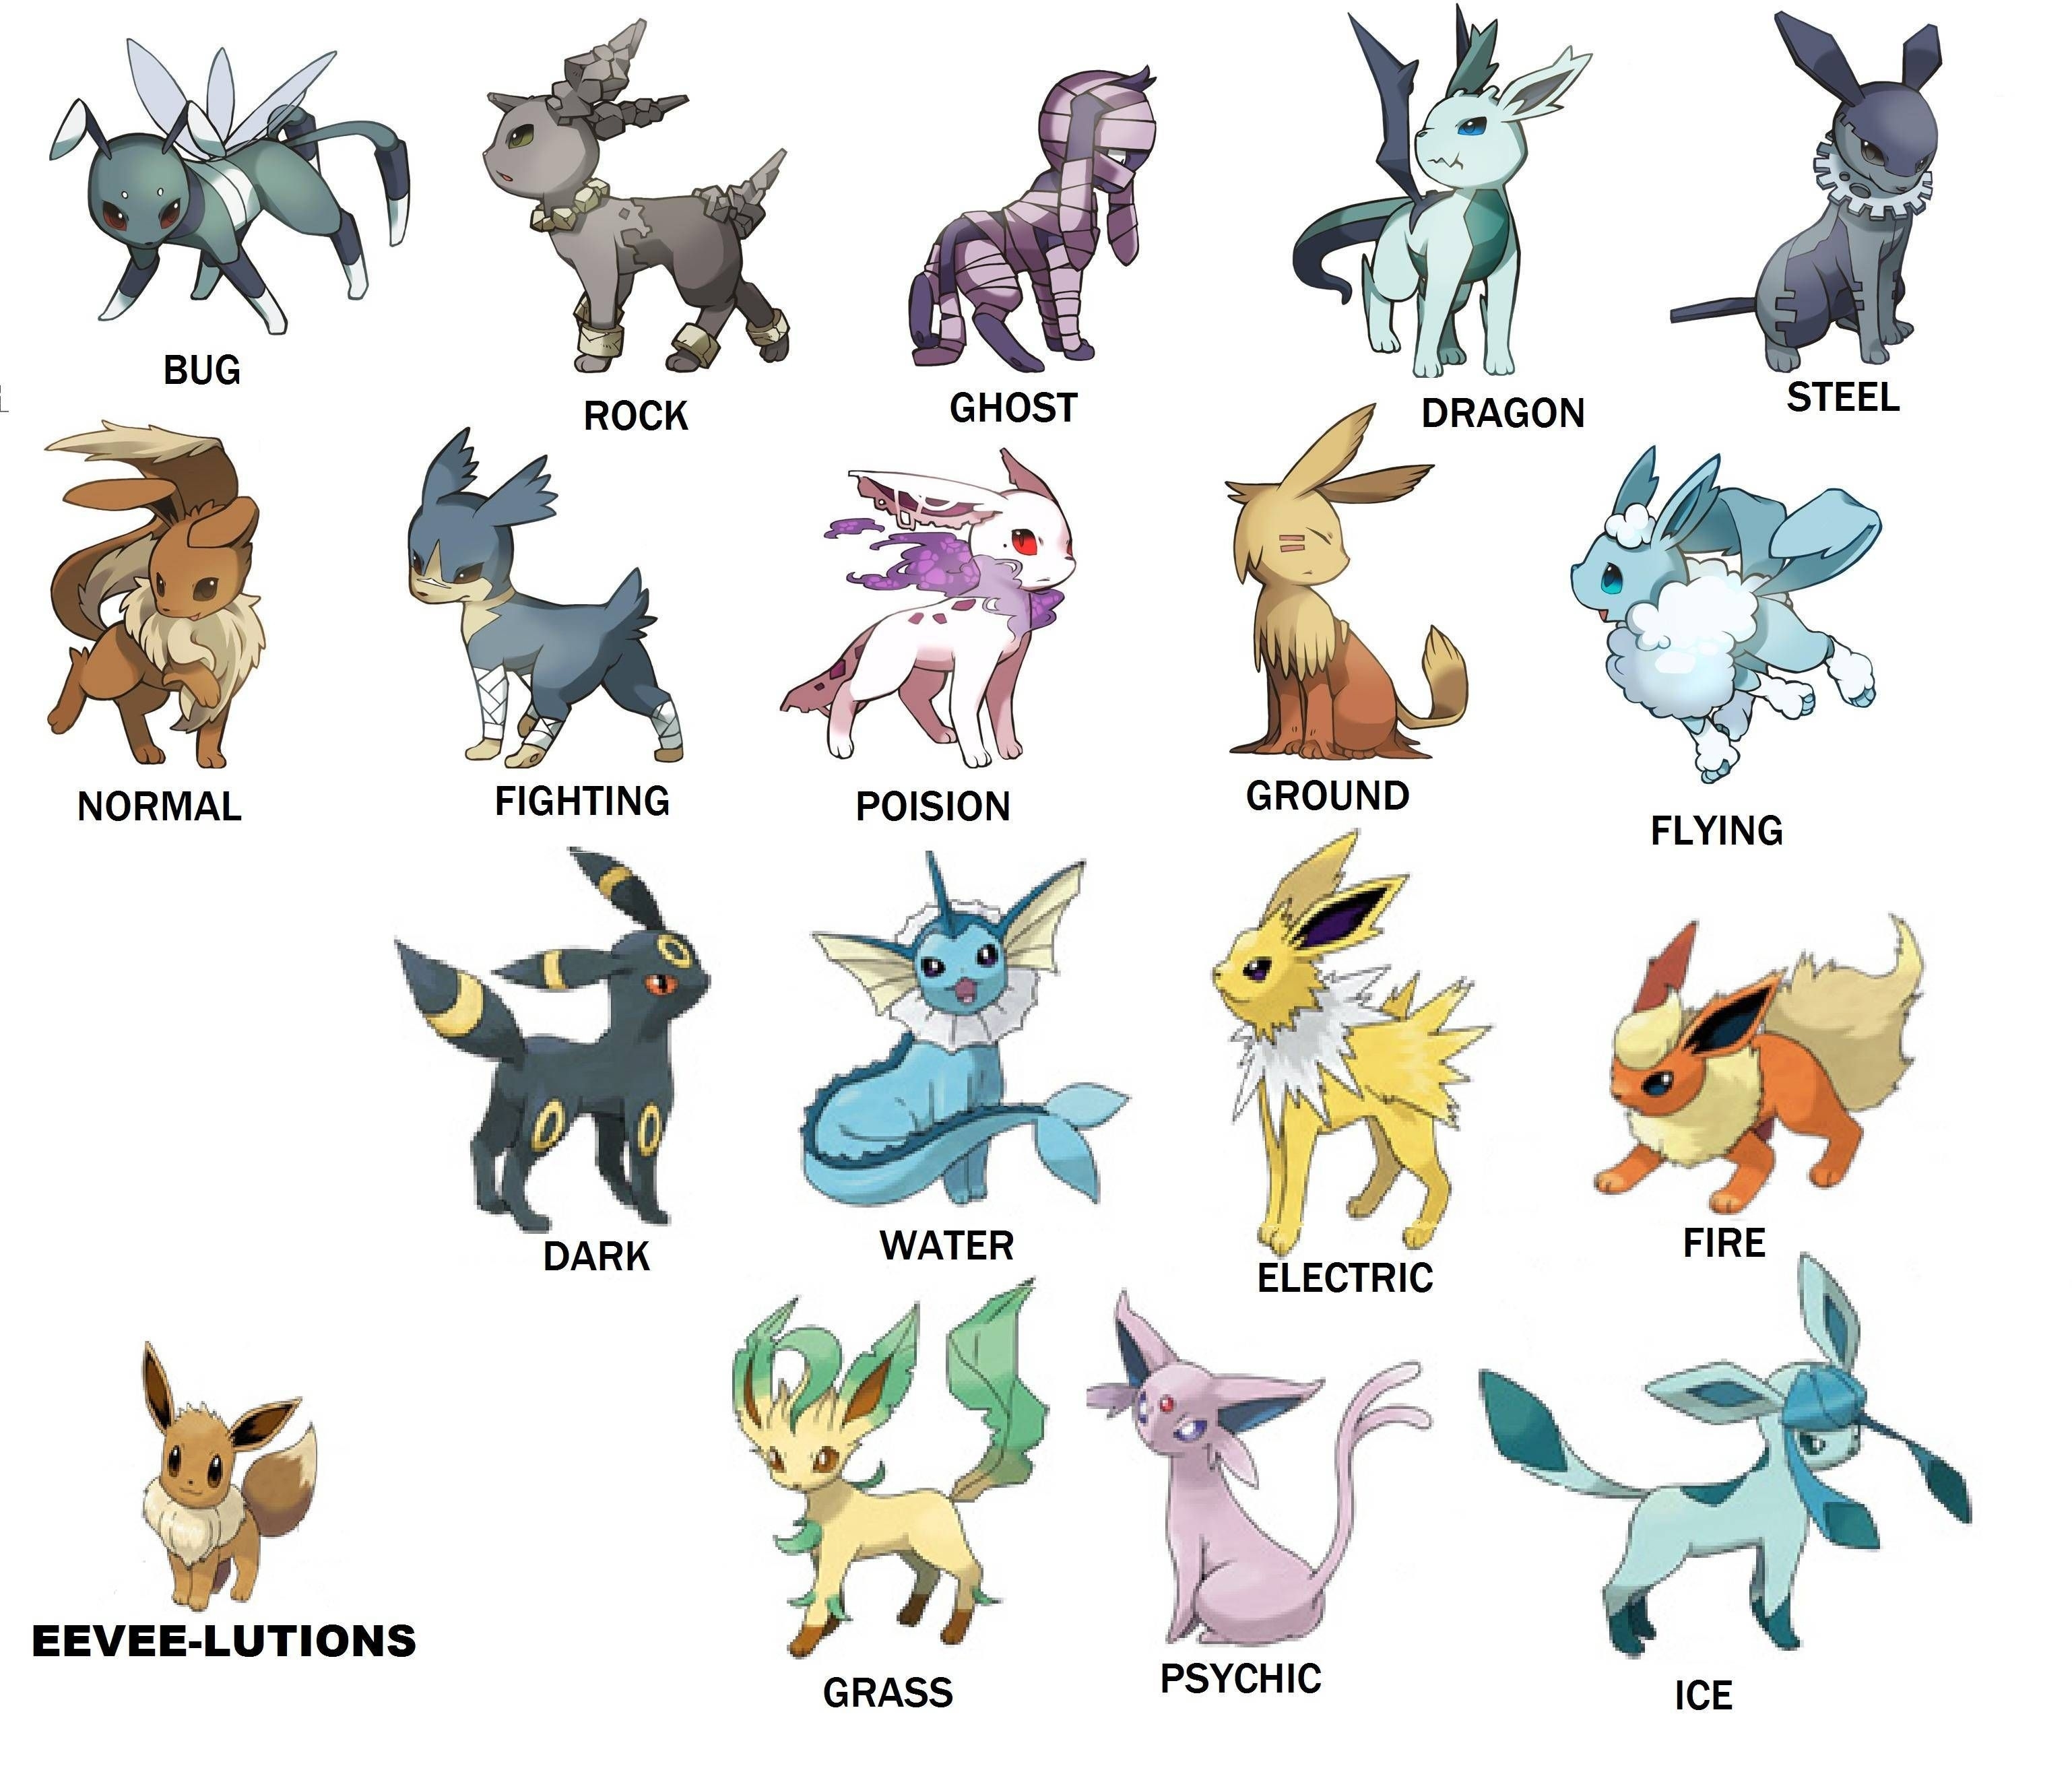 for all the pokemon fans out there, this is all of the current eevee